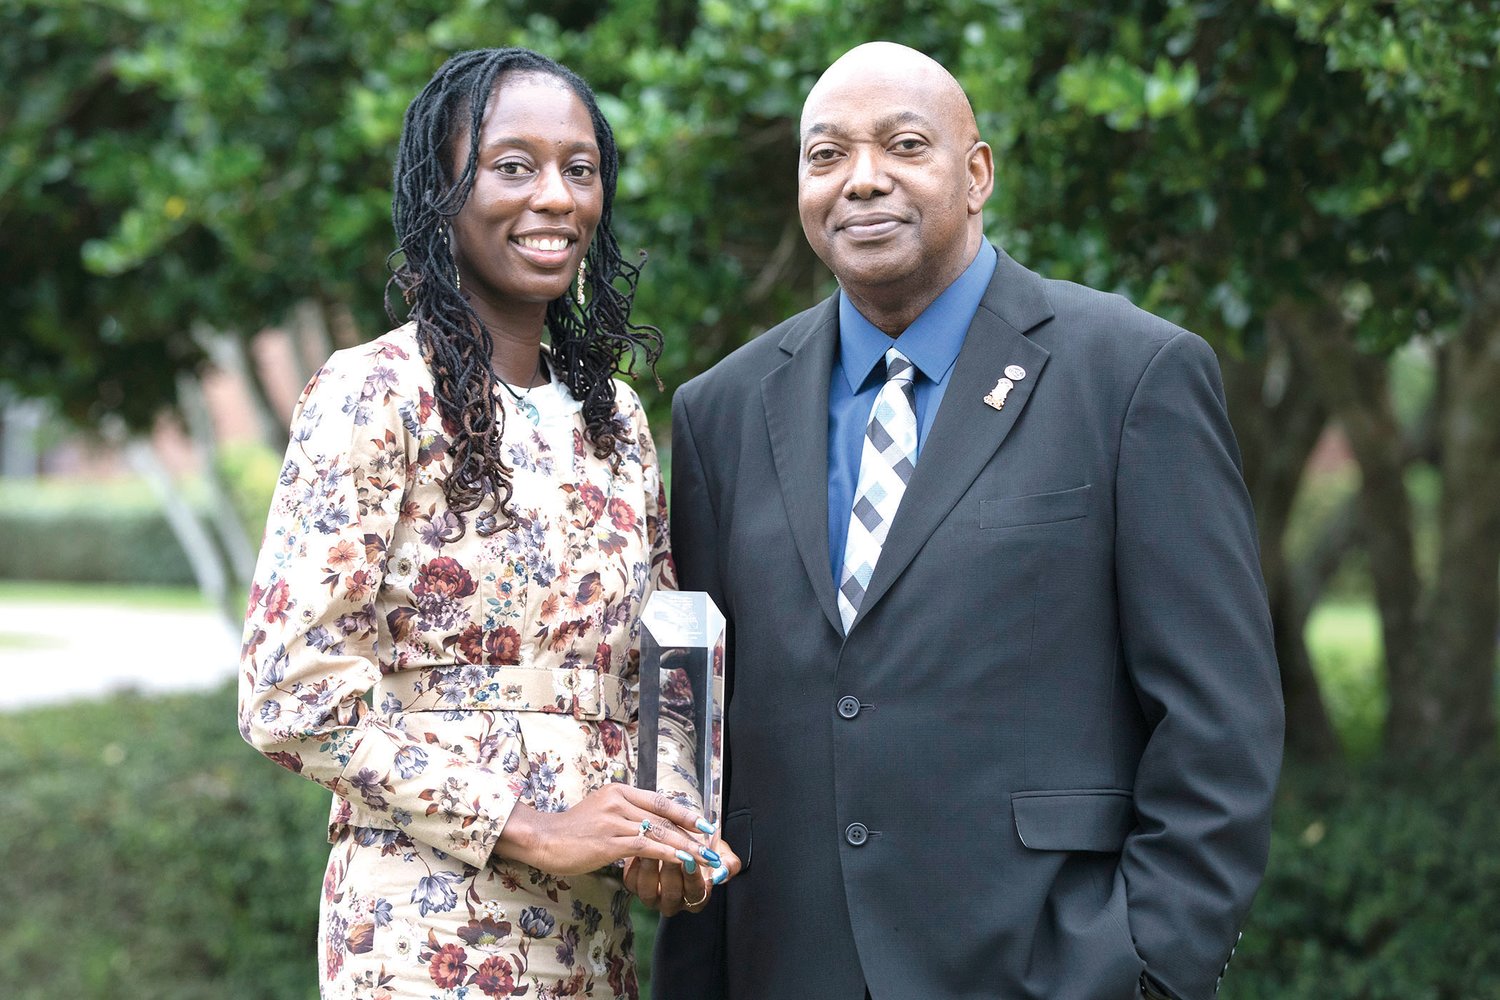 Sabby Hightower received the Leroy Collins award from AFC on.Thursday, Nov. 18, 2021, at the Massey Campus in Fort Pierce.